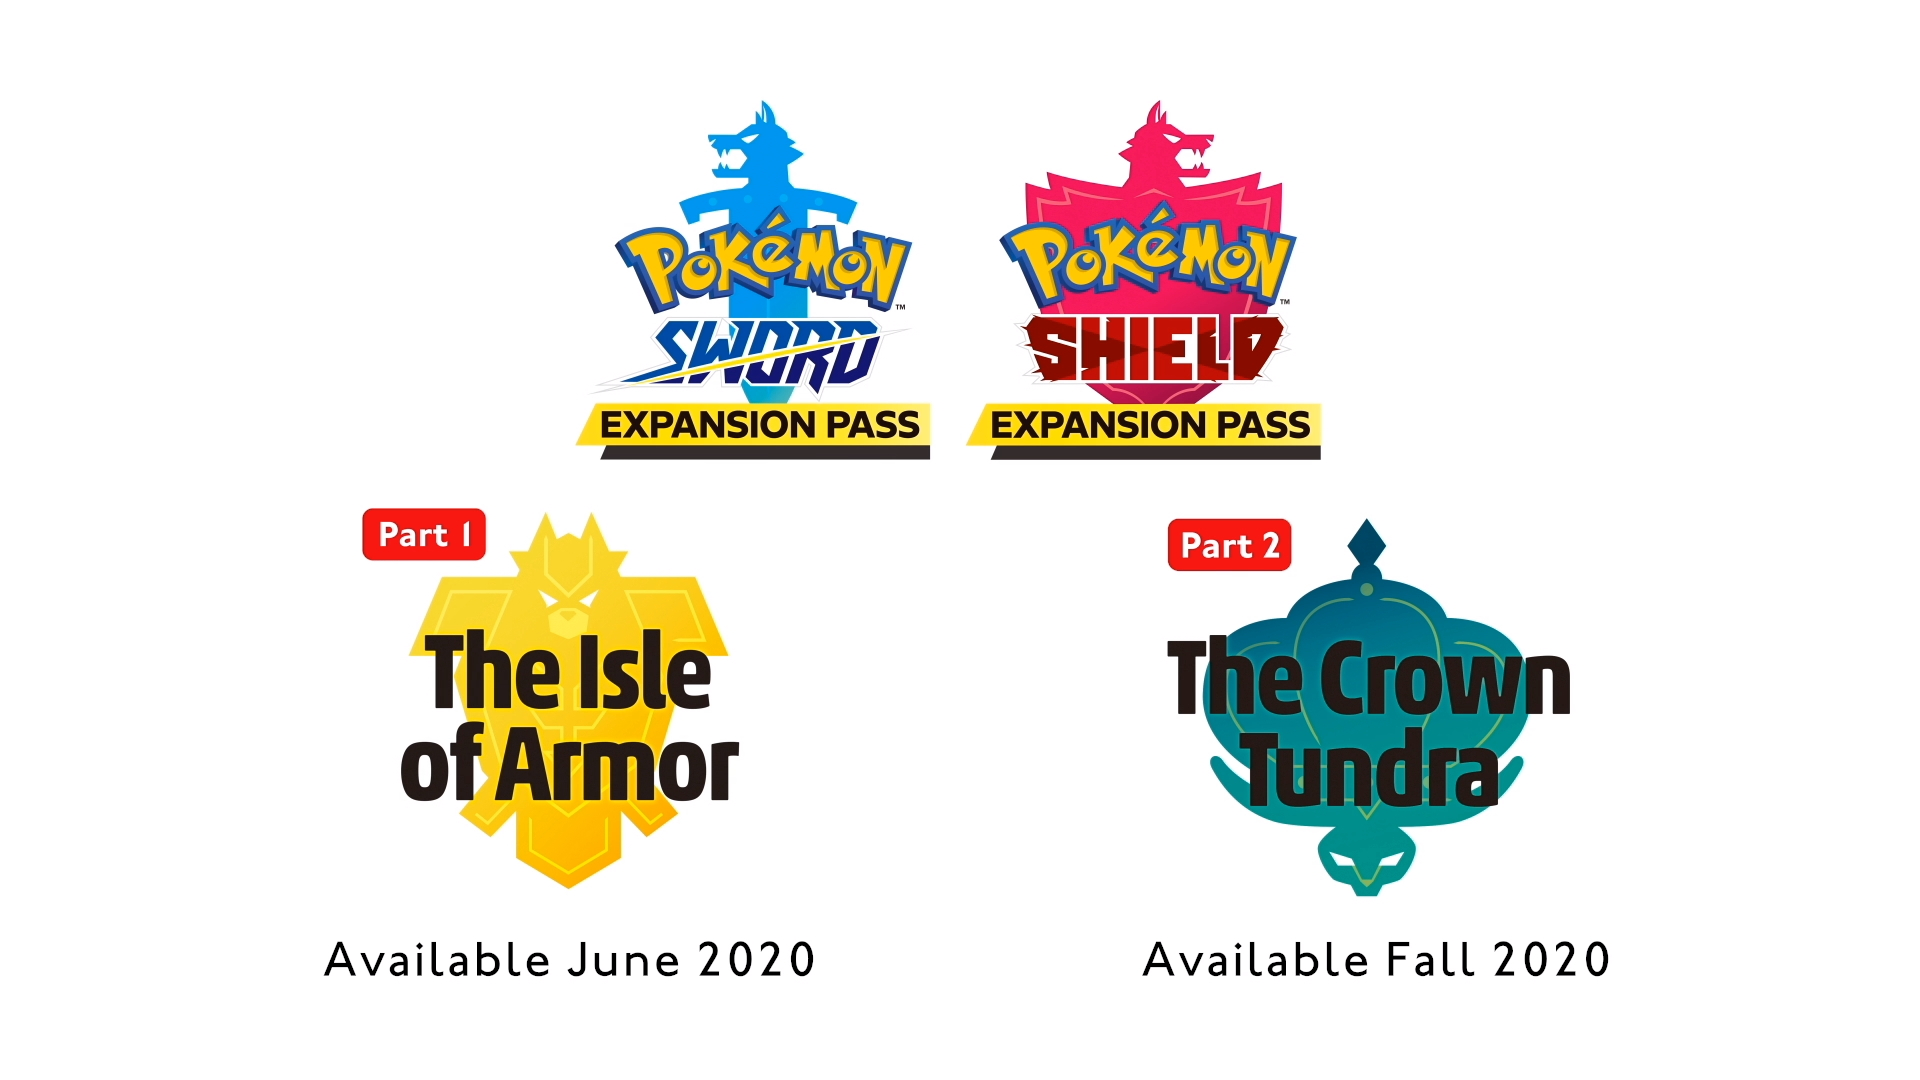 Pokémon Sword and Shield Expansion Pass Announced